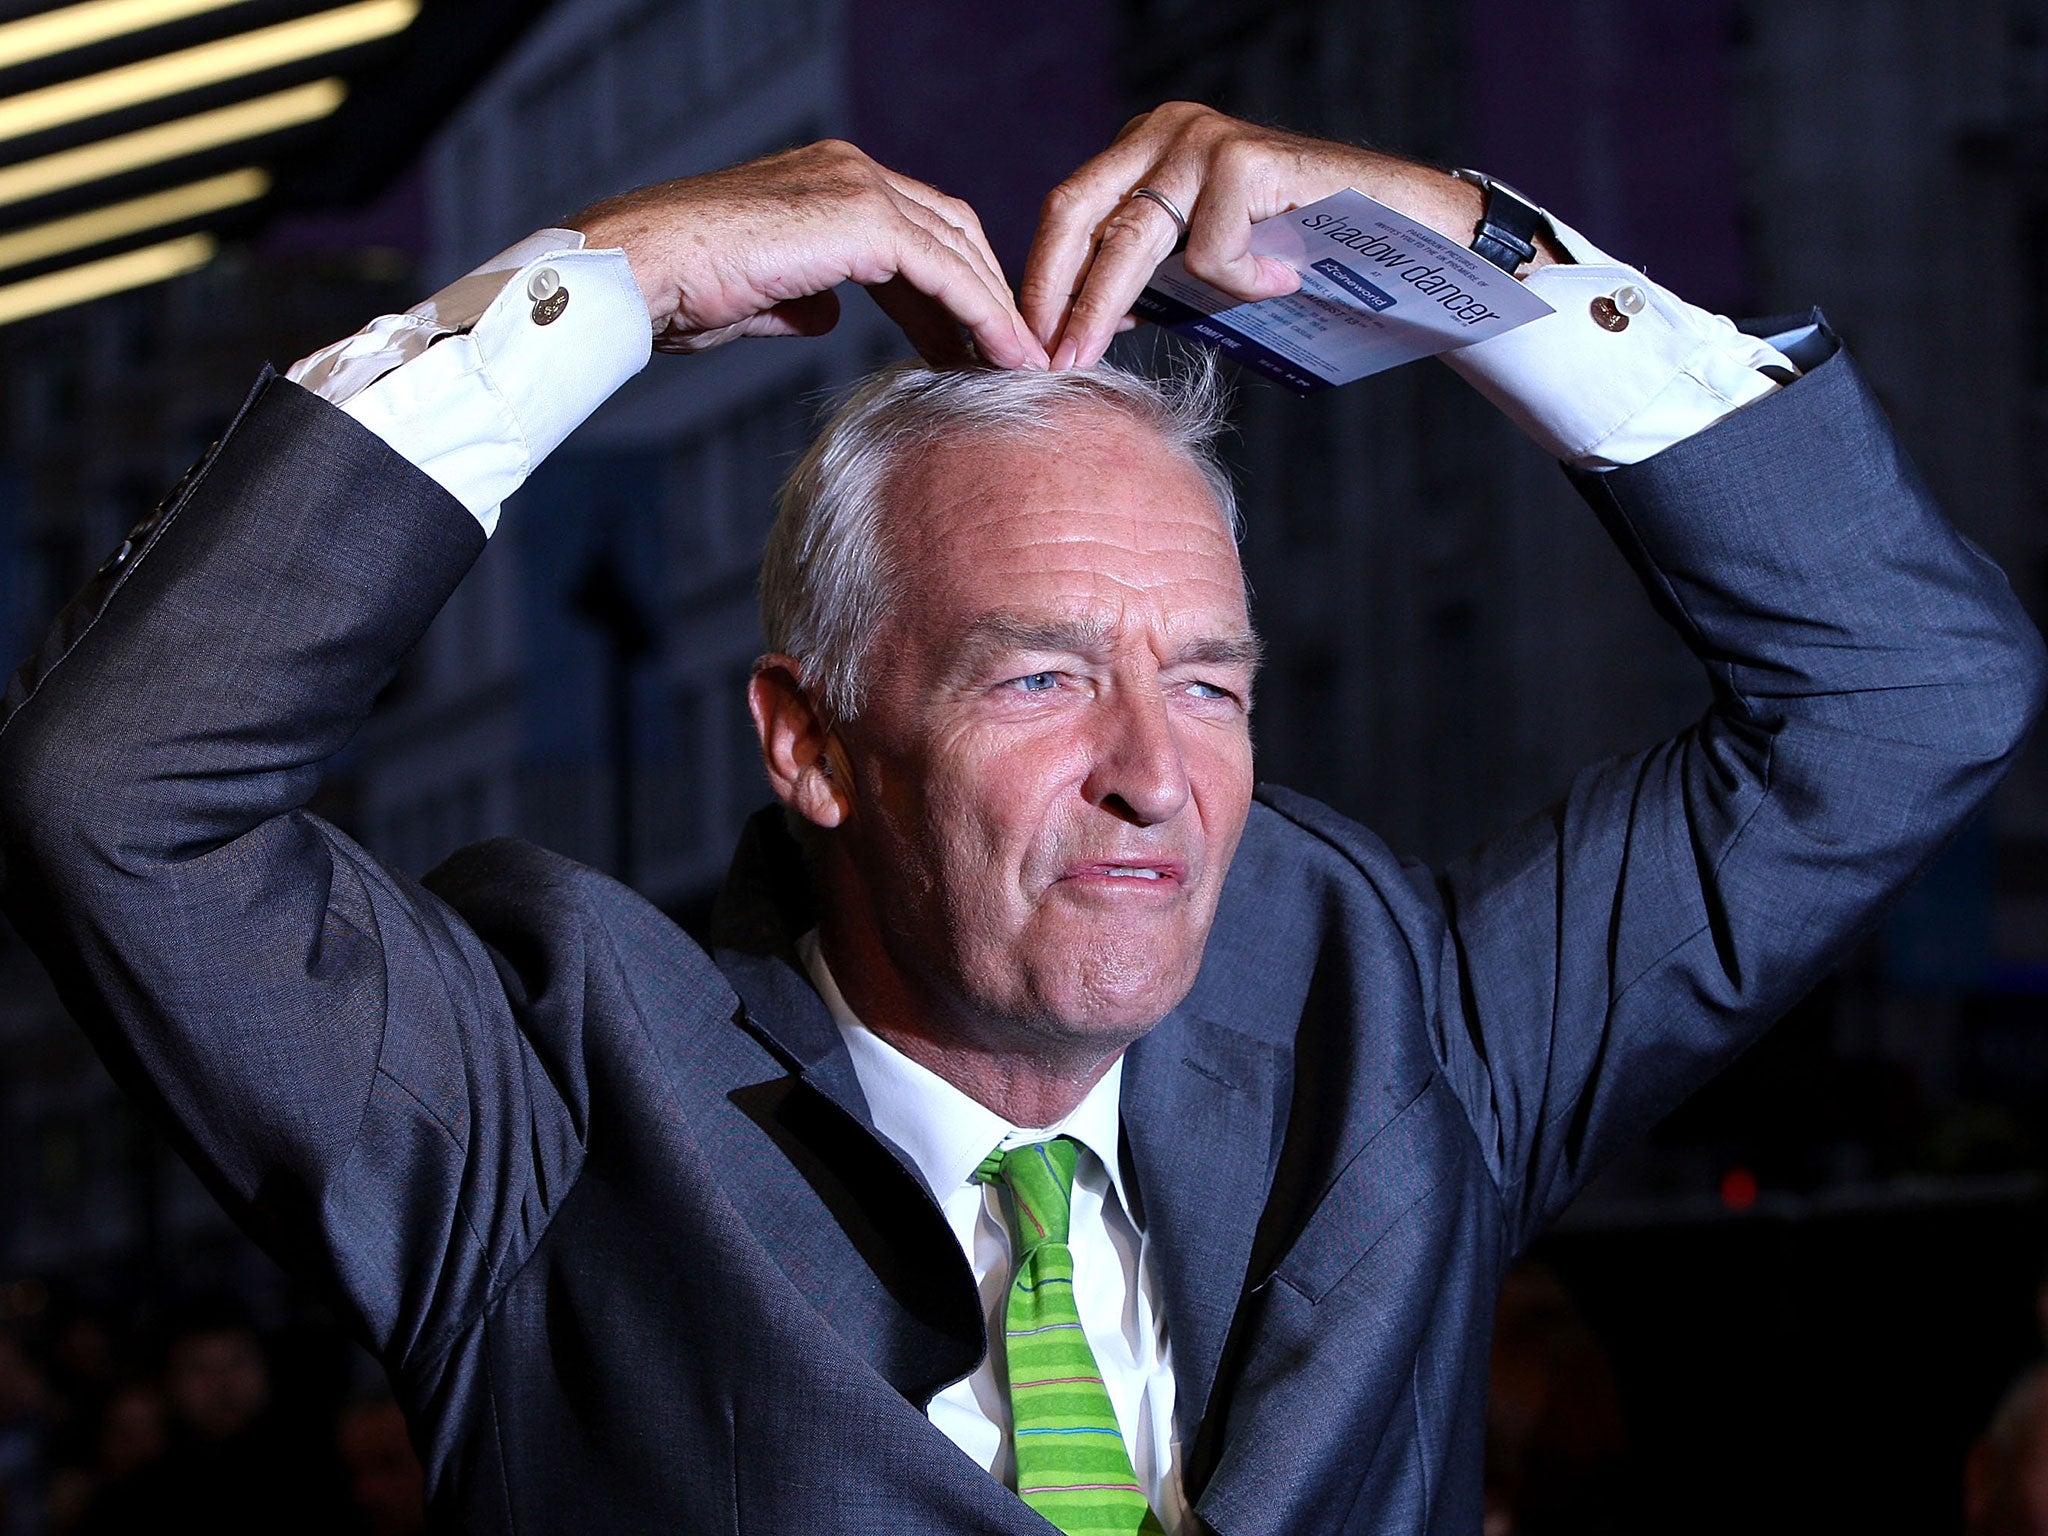 Jon Snow has become the face of Channel 4 after more than 26 years presenting the news. In this file image he does the 'Mo-bot' at the UK premiere of Shadow Dancer in August 2012